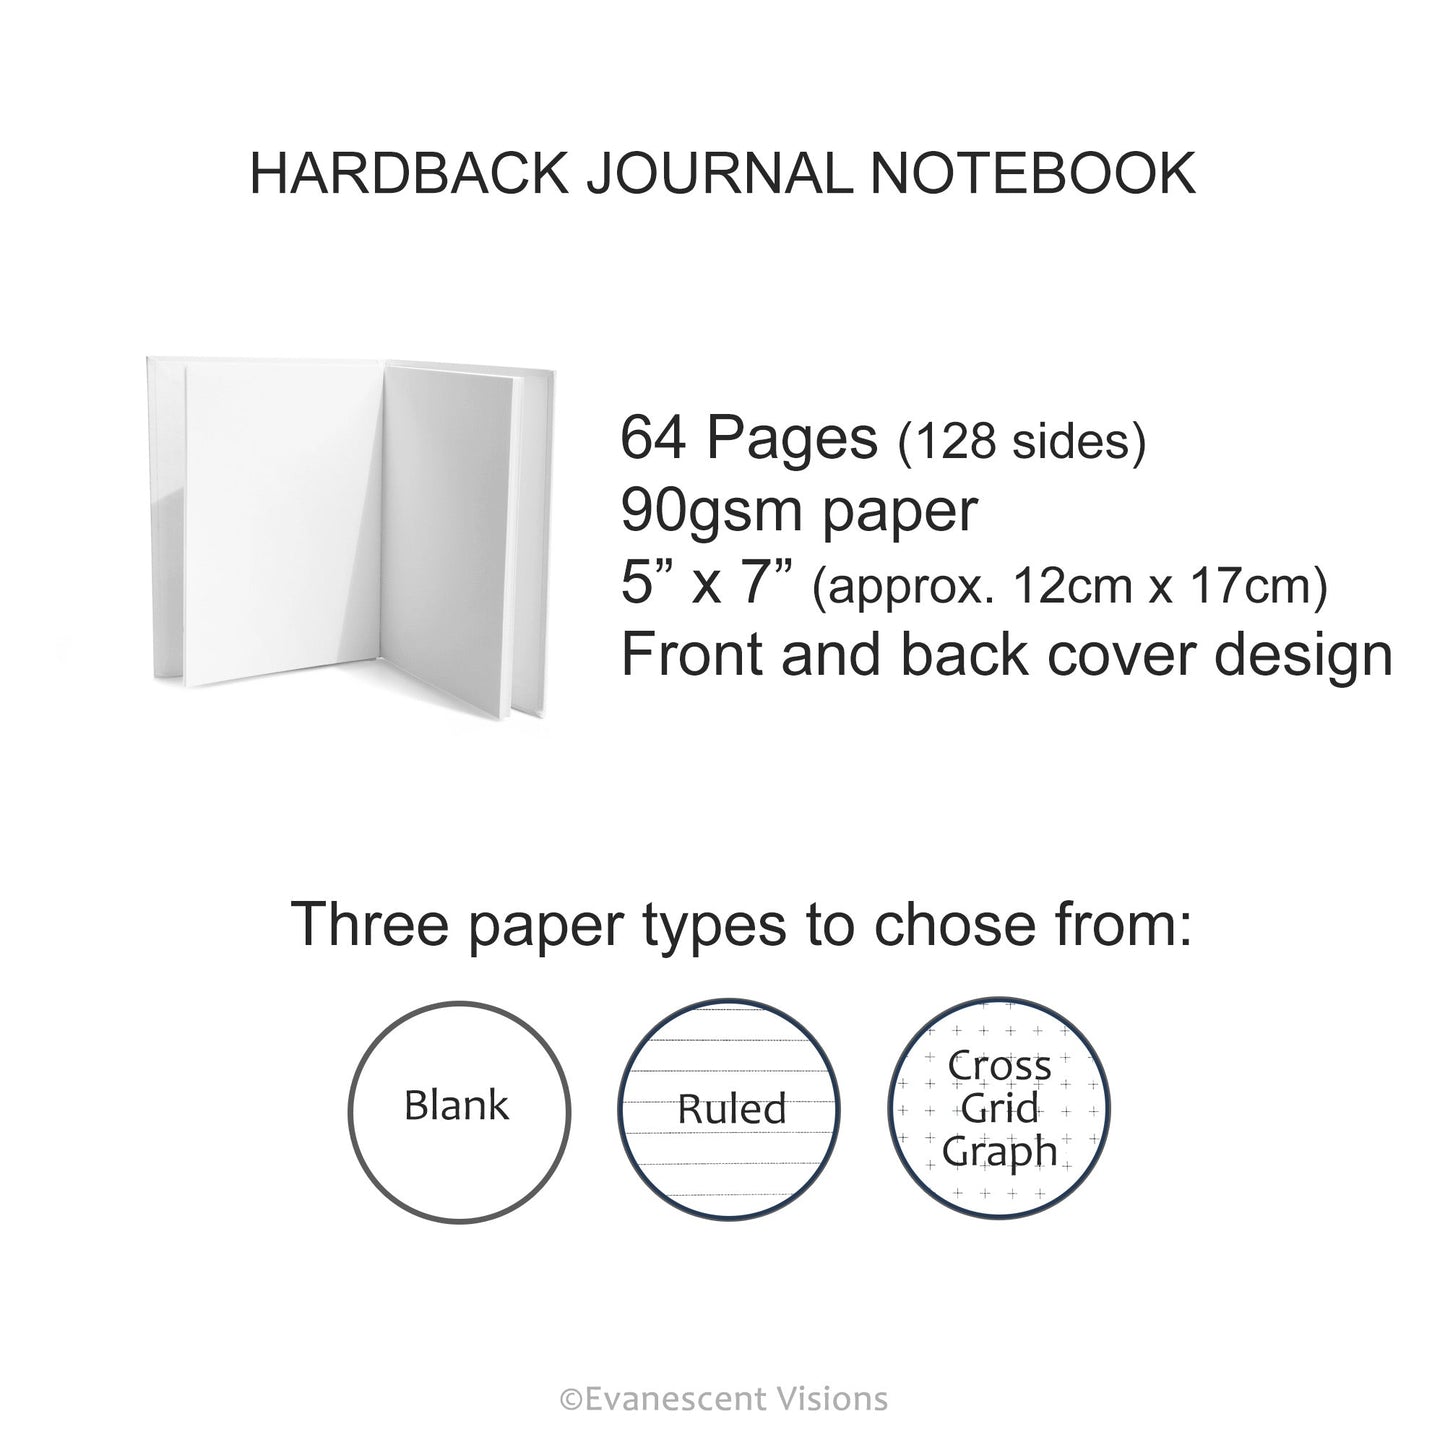 Hardcover notebook product details and paper options